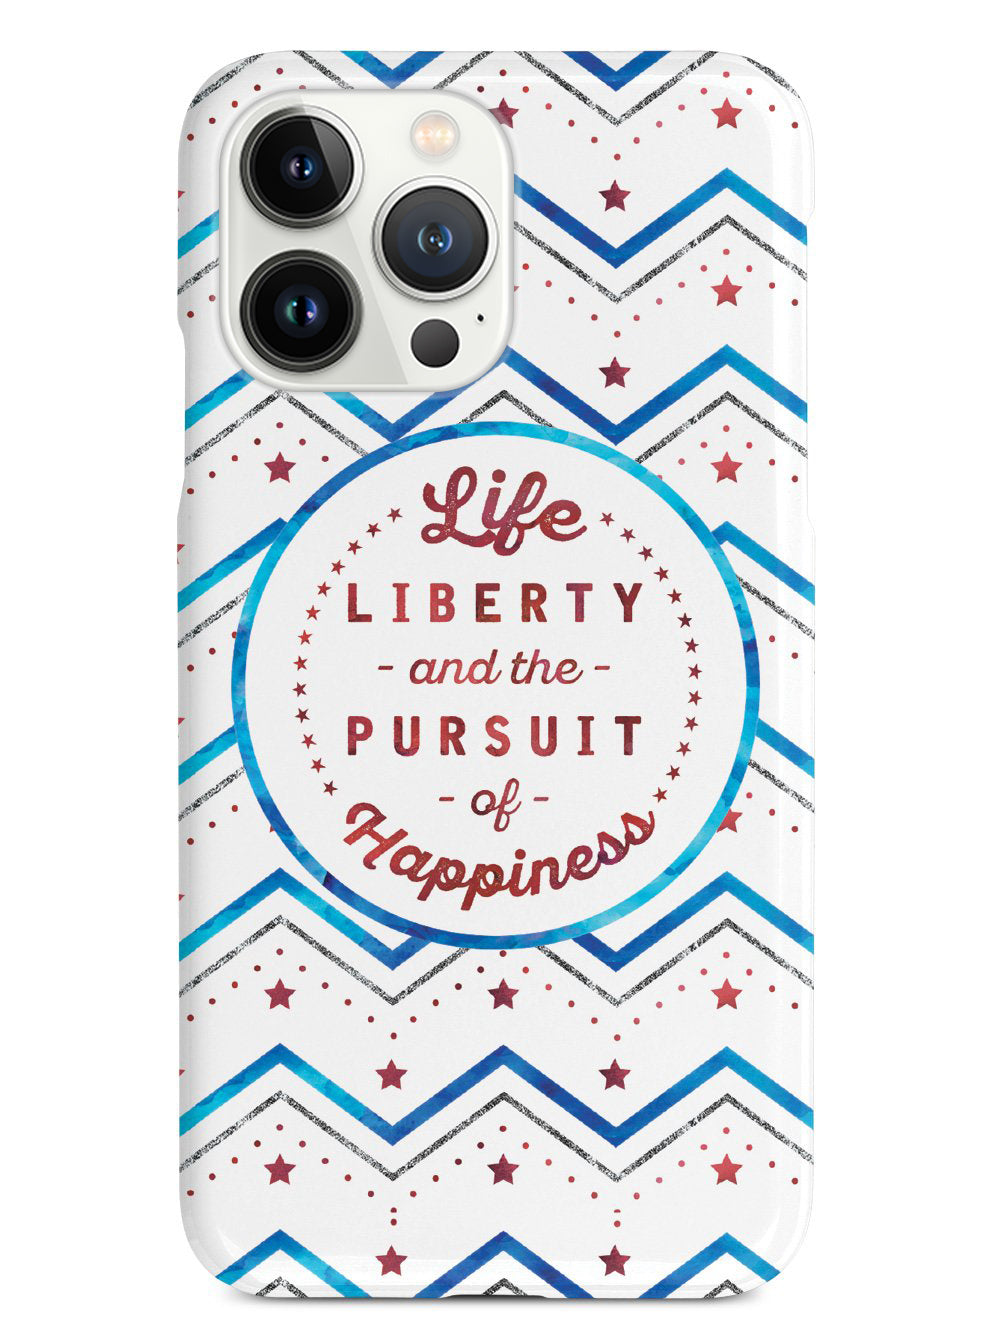 Life, Liberty, and the Pursuit of Happiness - Patriotic Case